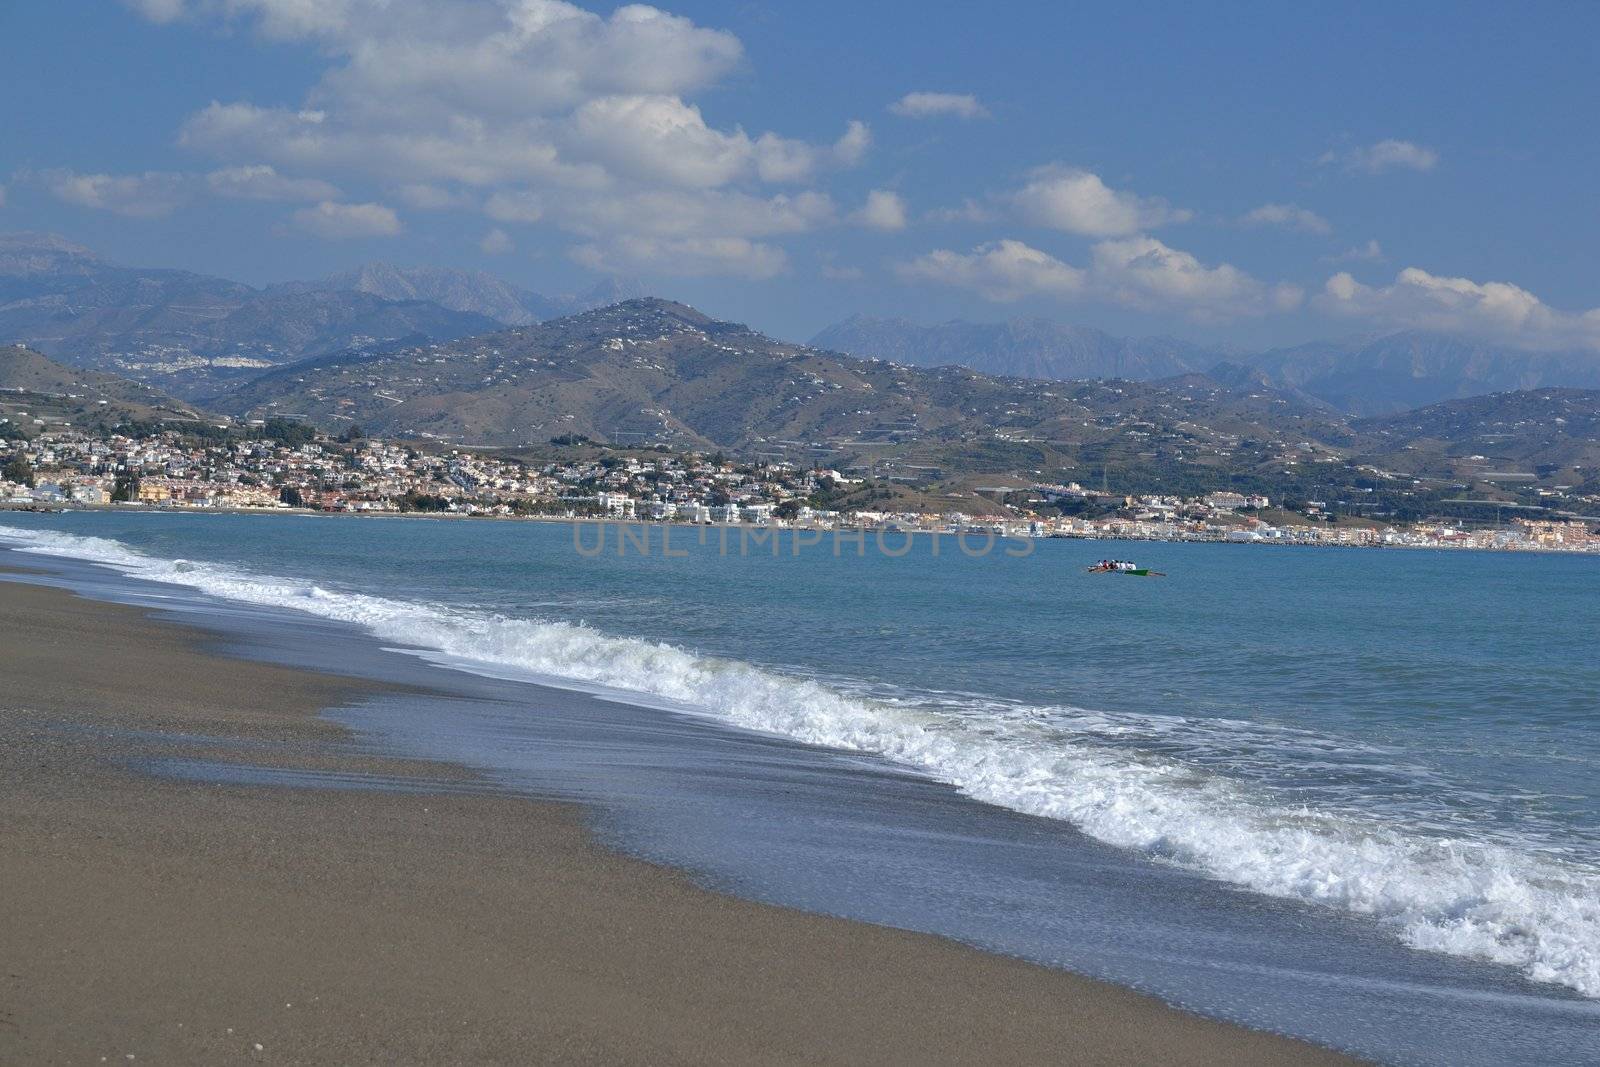 beaches of Nerja, a town fifty miles distant from Malaga